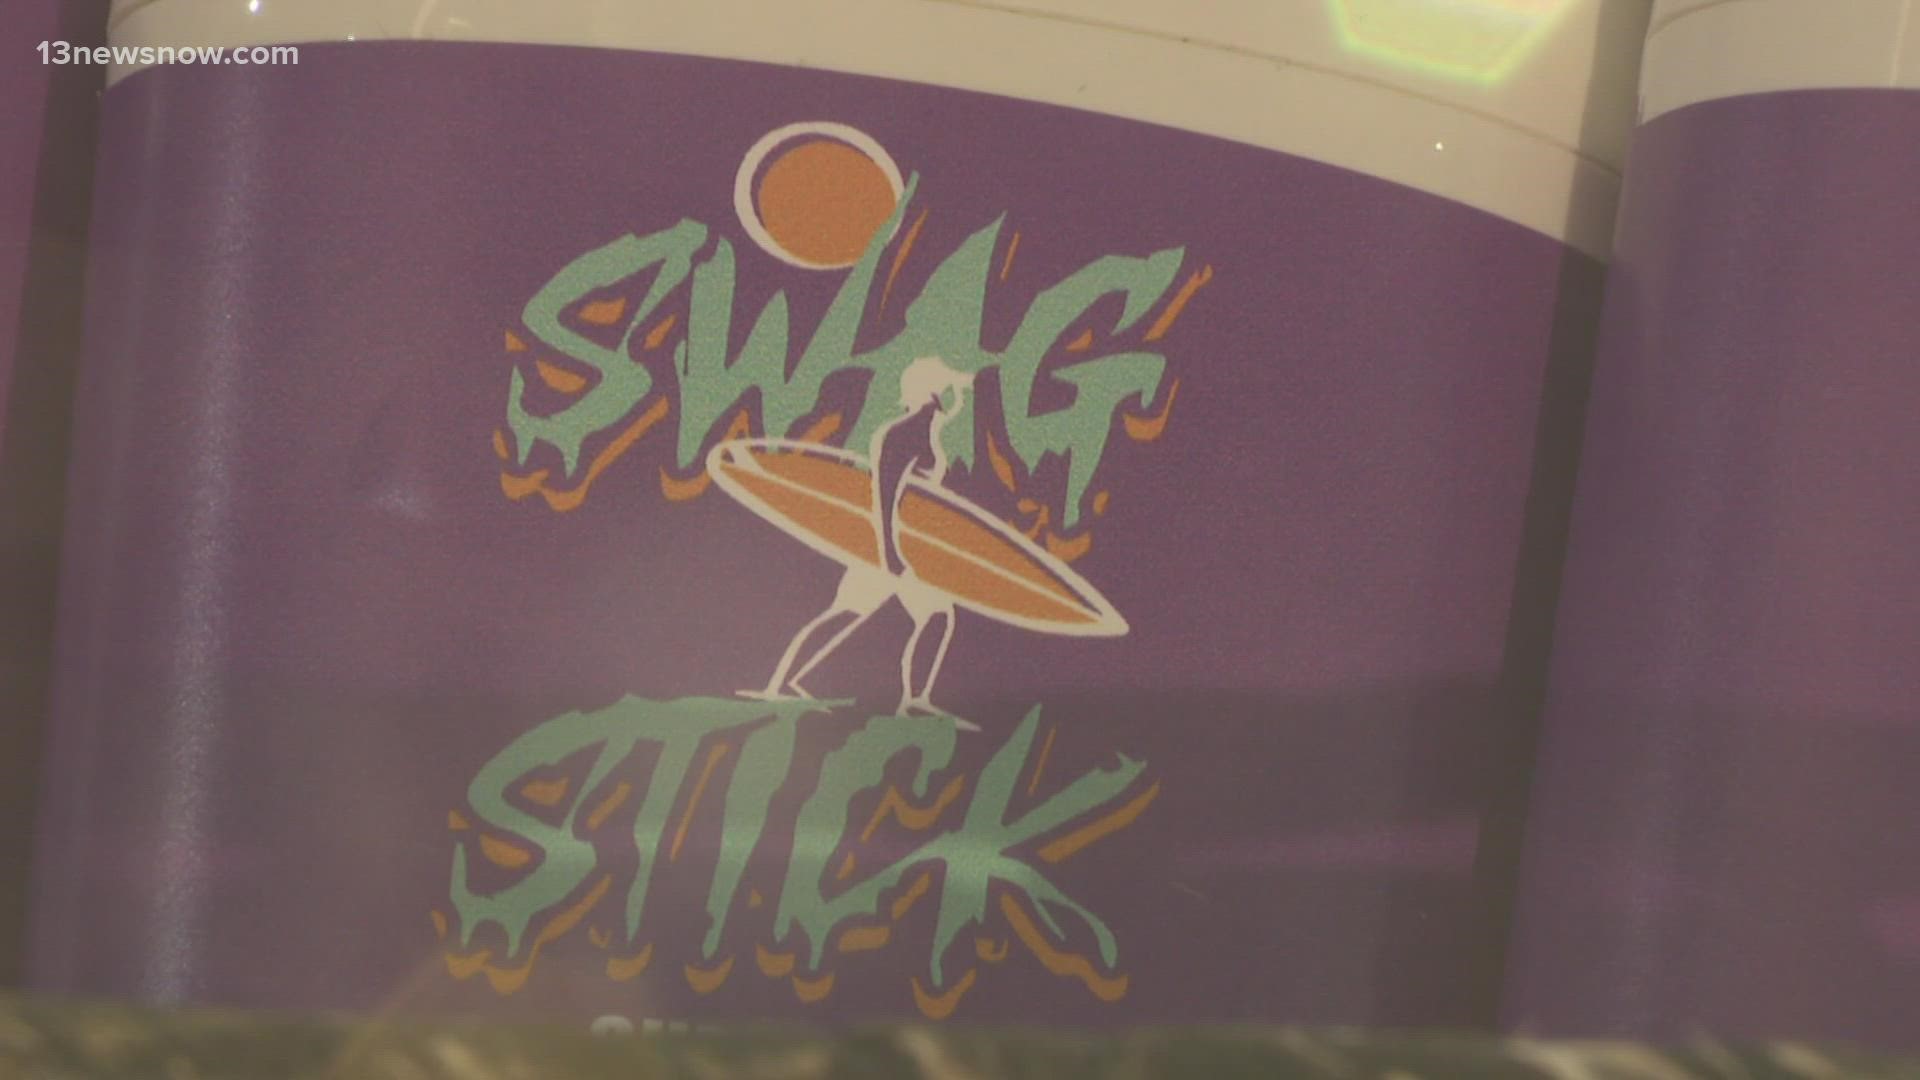 The young entrepreneurs are selling surf wax, "Swag Stick," in Coastal Edge stores in Virginia Beach